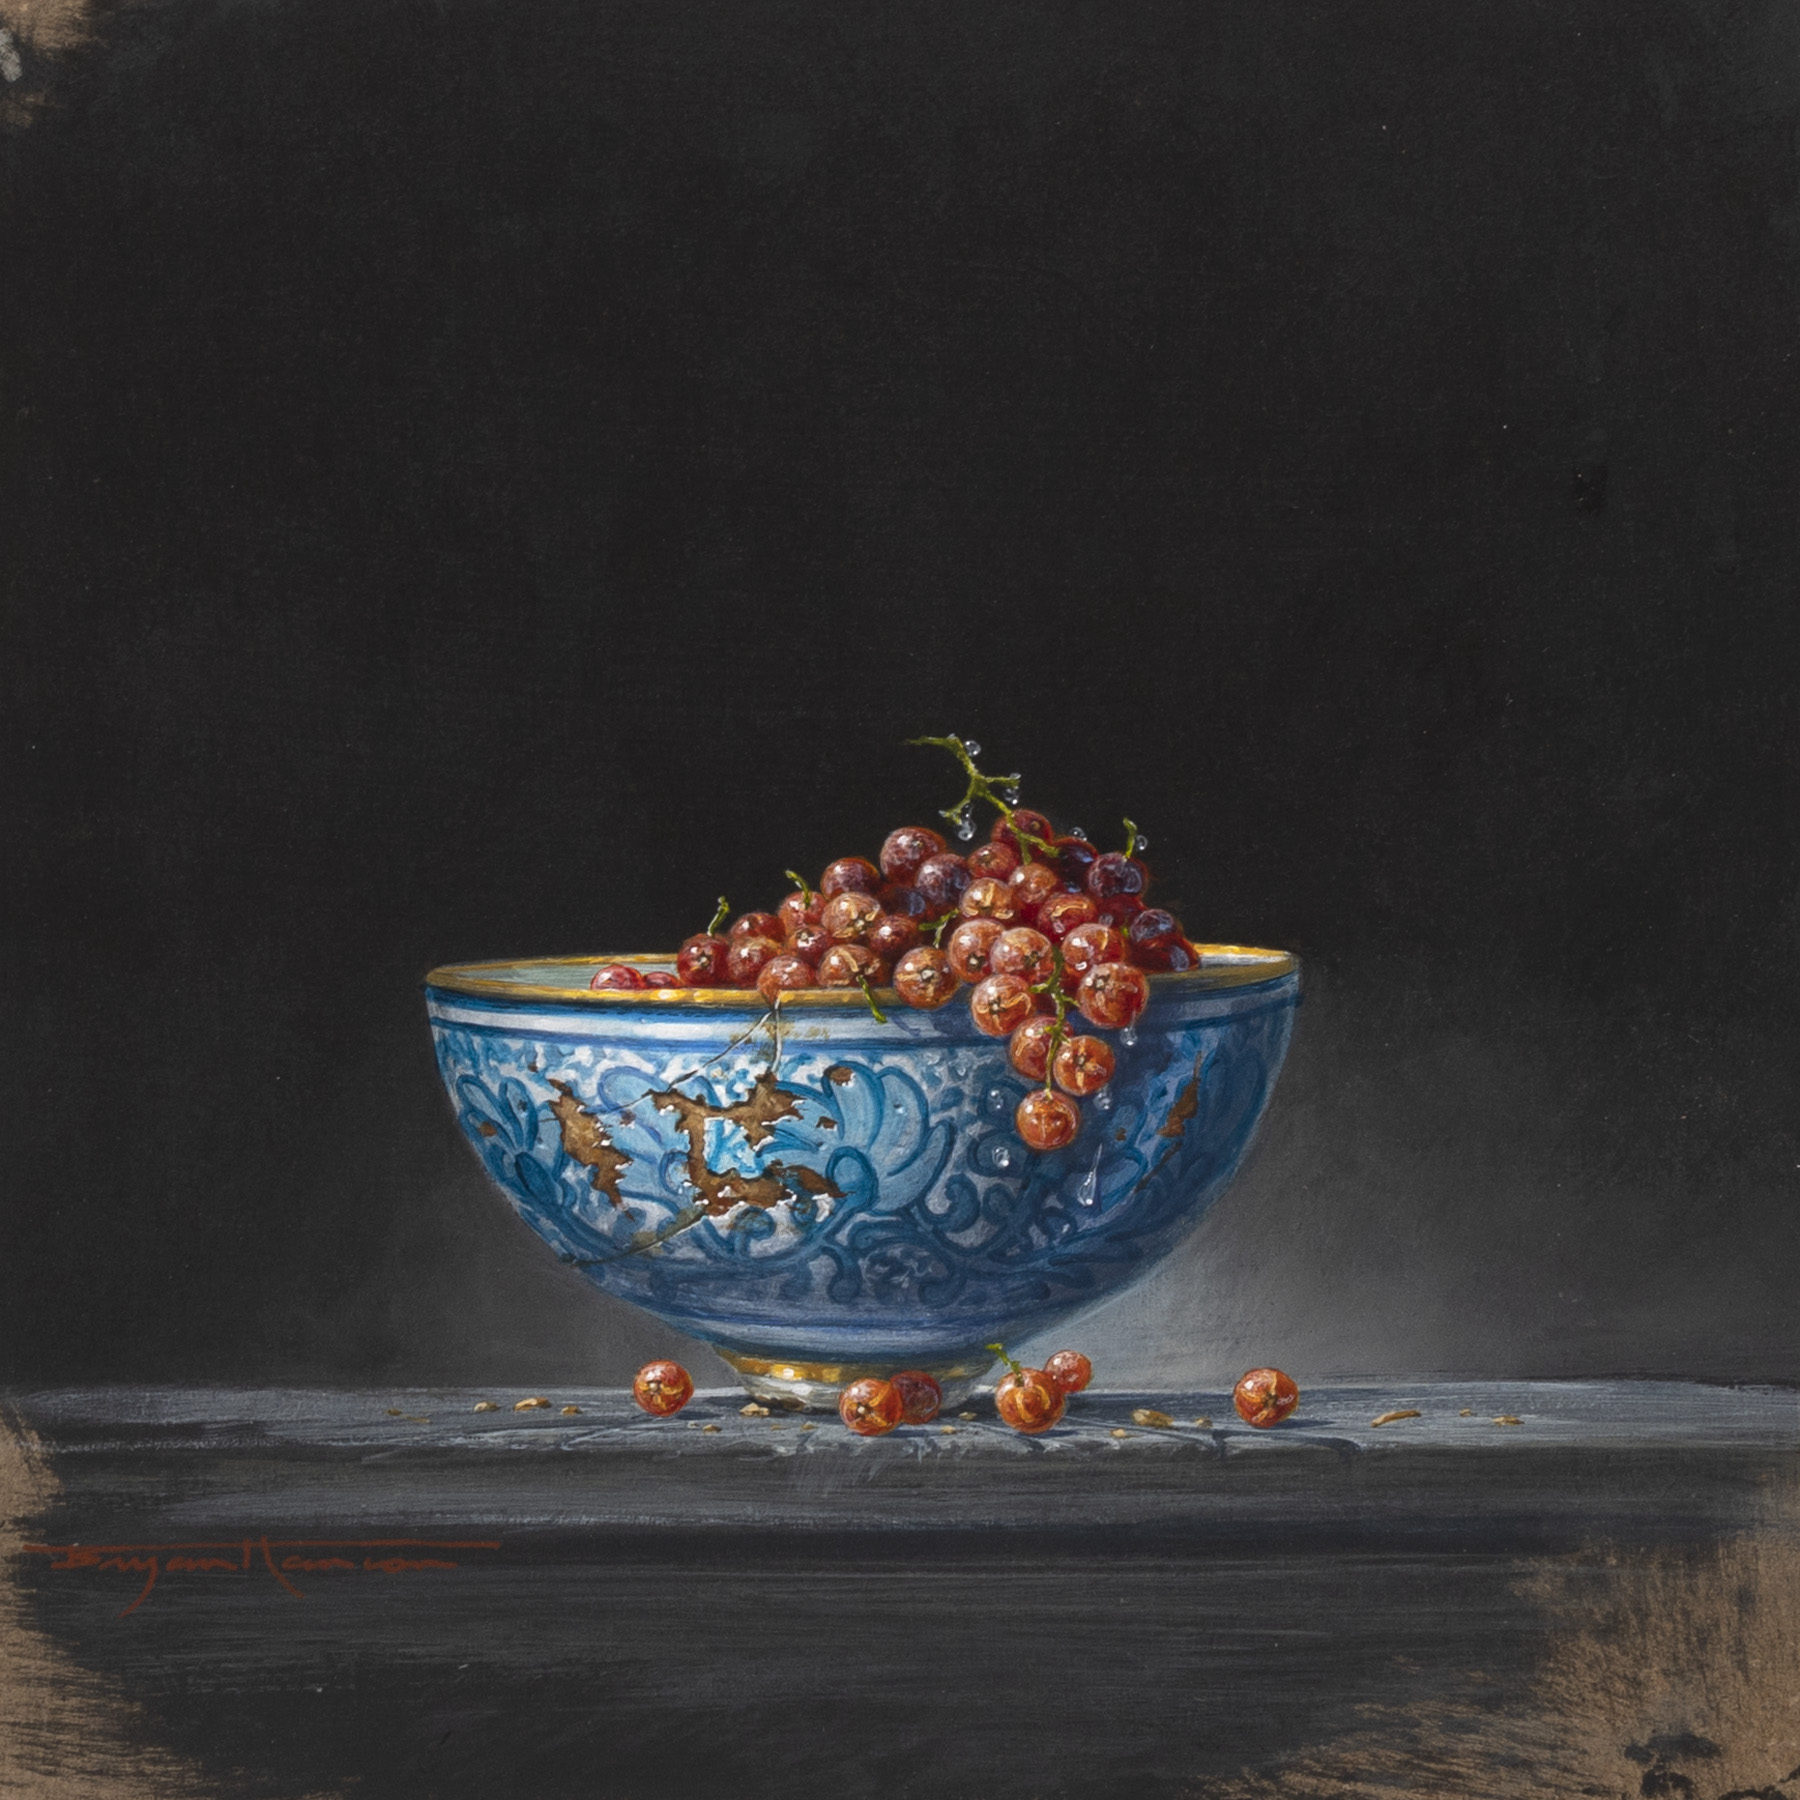 Chinese bowl and redcurrants